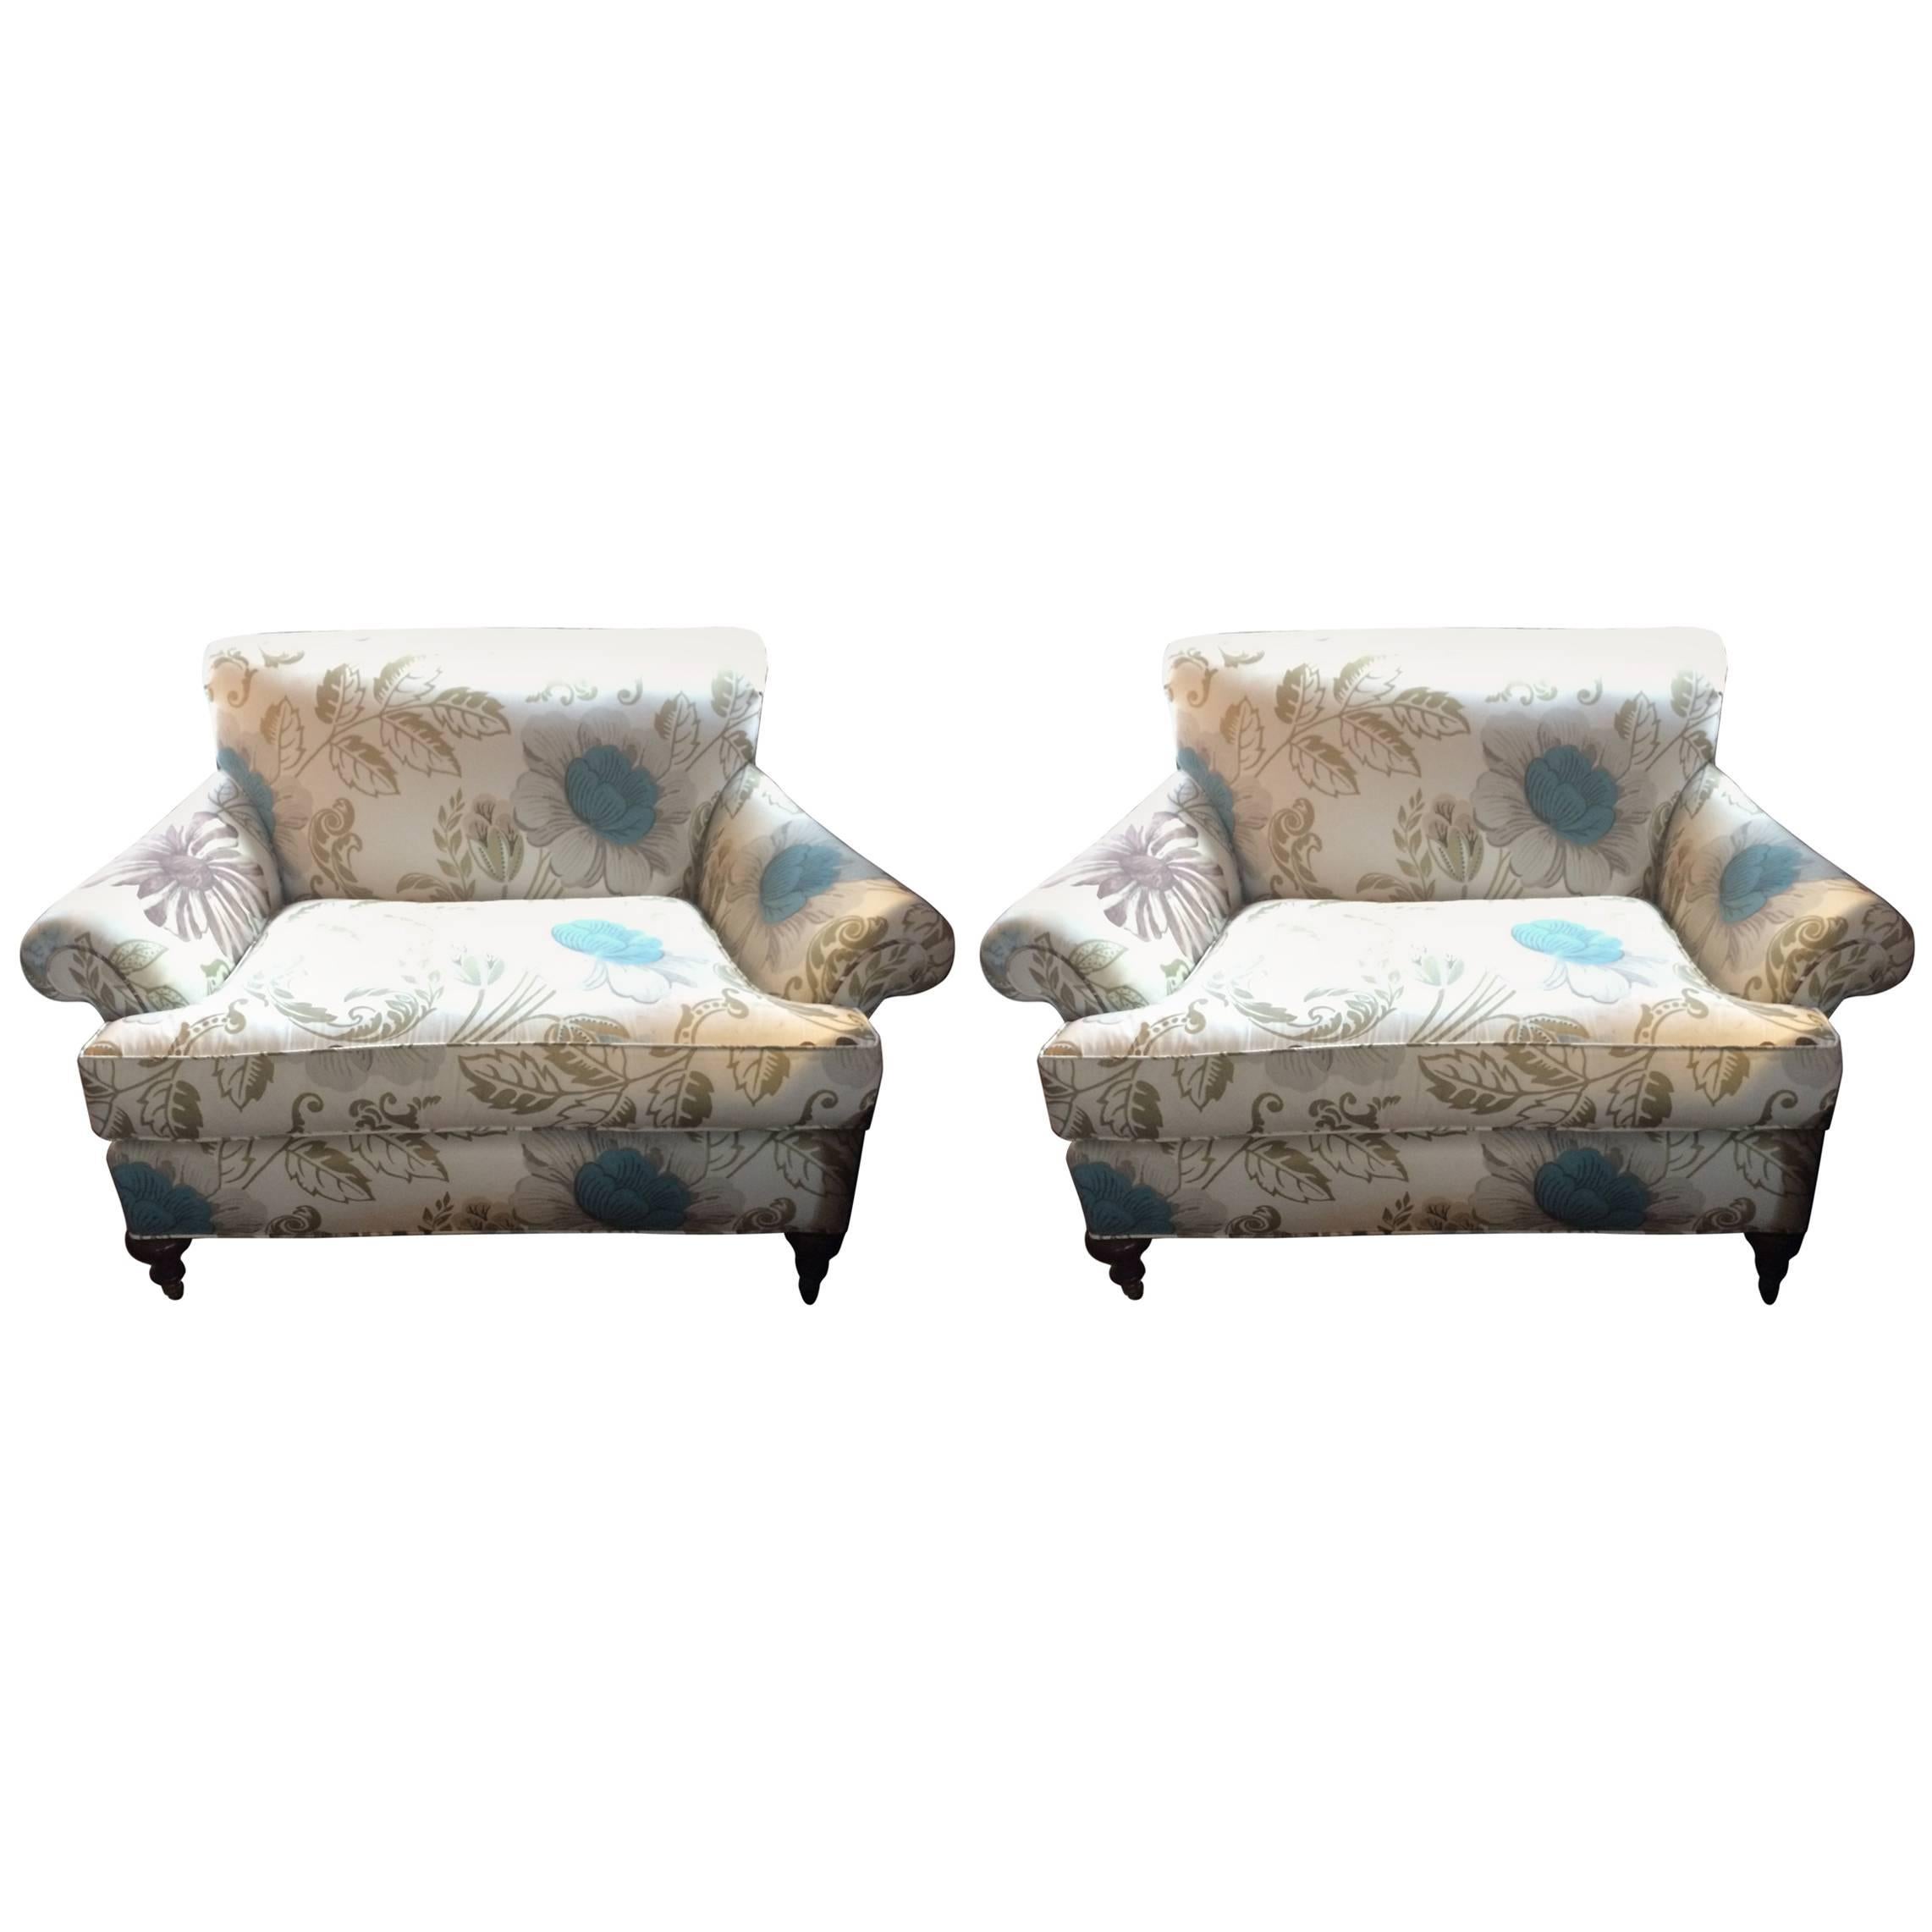 Luxurious Pair of Oversized English Style Upholstered Chairs